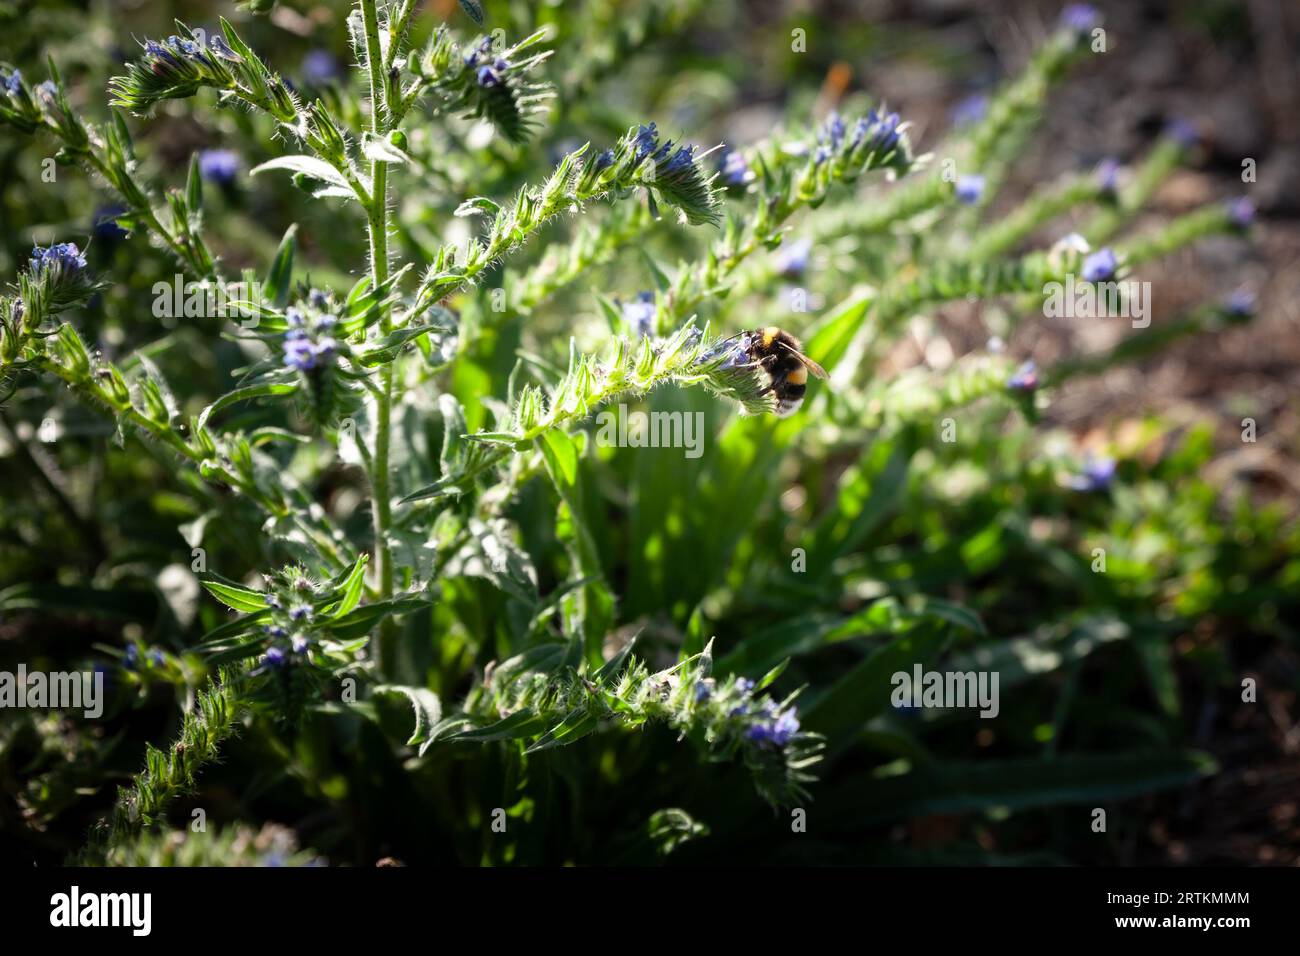 Picture of a umblebee foraging a group of flowers in summer. A bumblebee is any of over 250 species in the genus Bombus, part of Apidae, one of the be Stock Photo